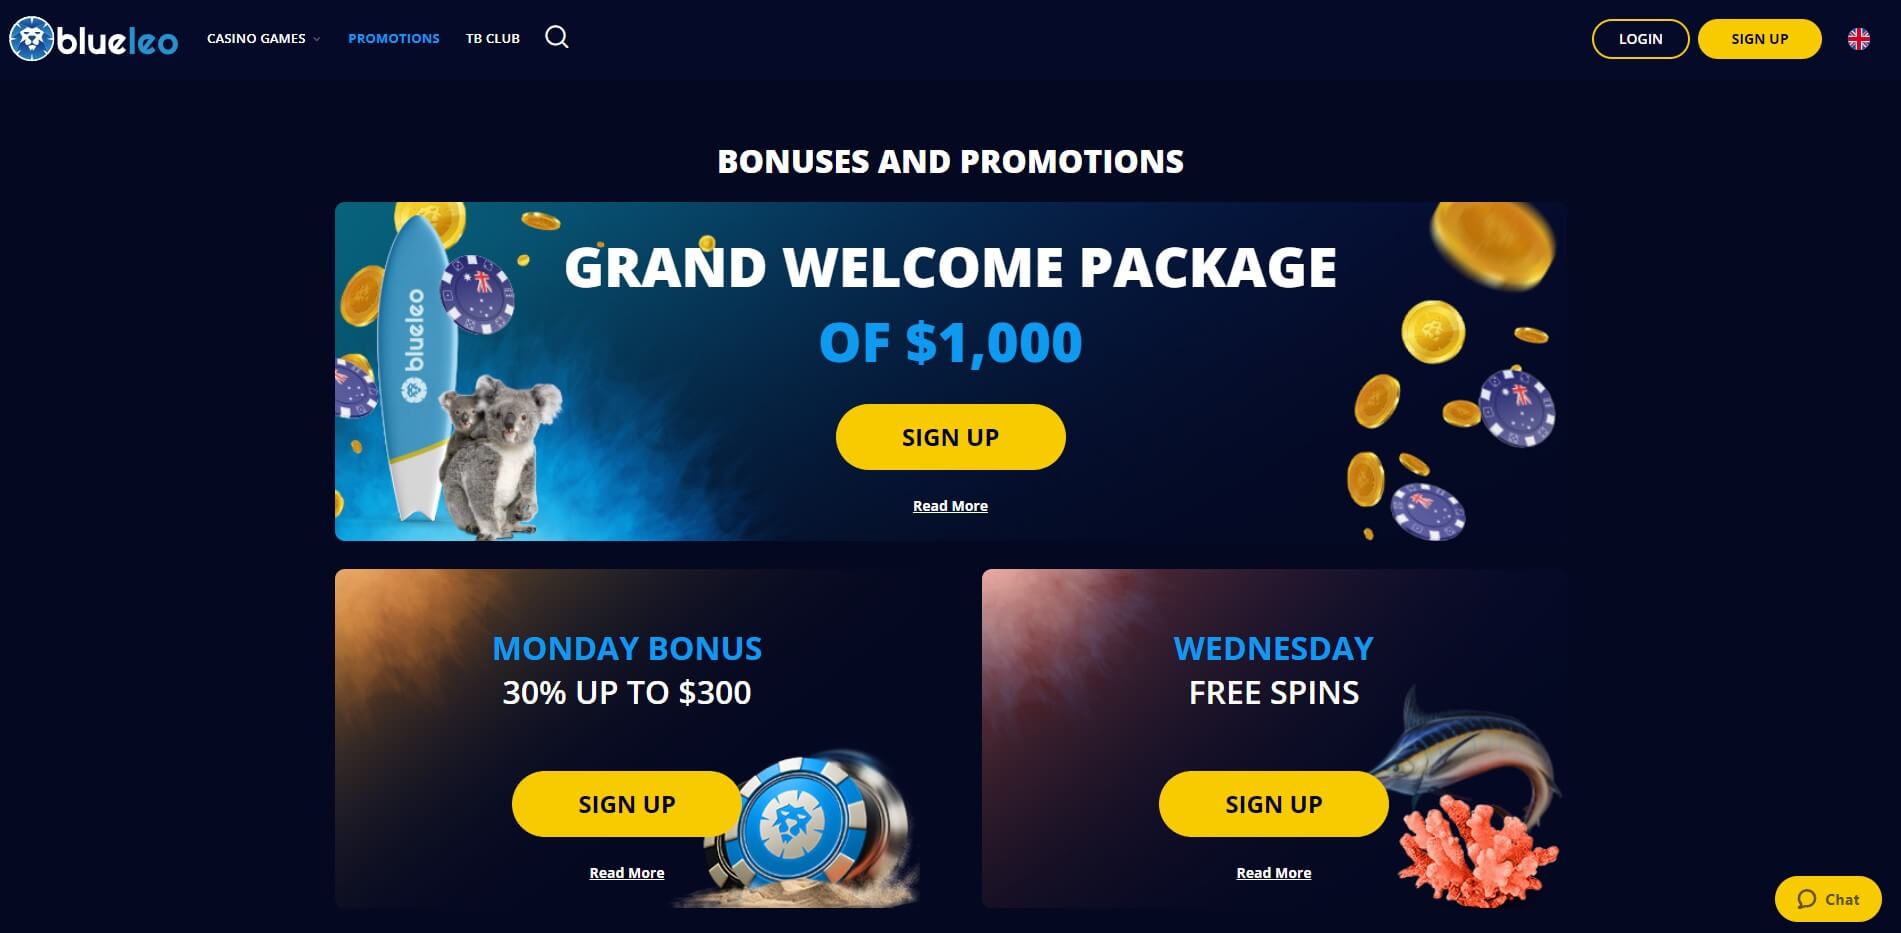 Promotions at Blueleo Casino